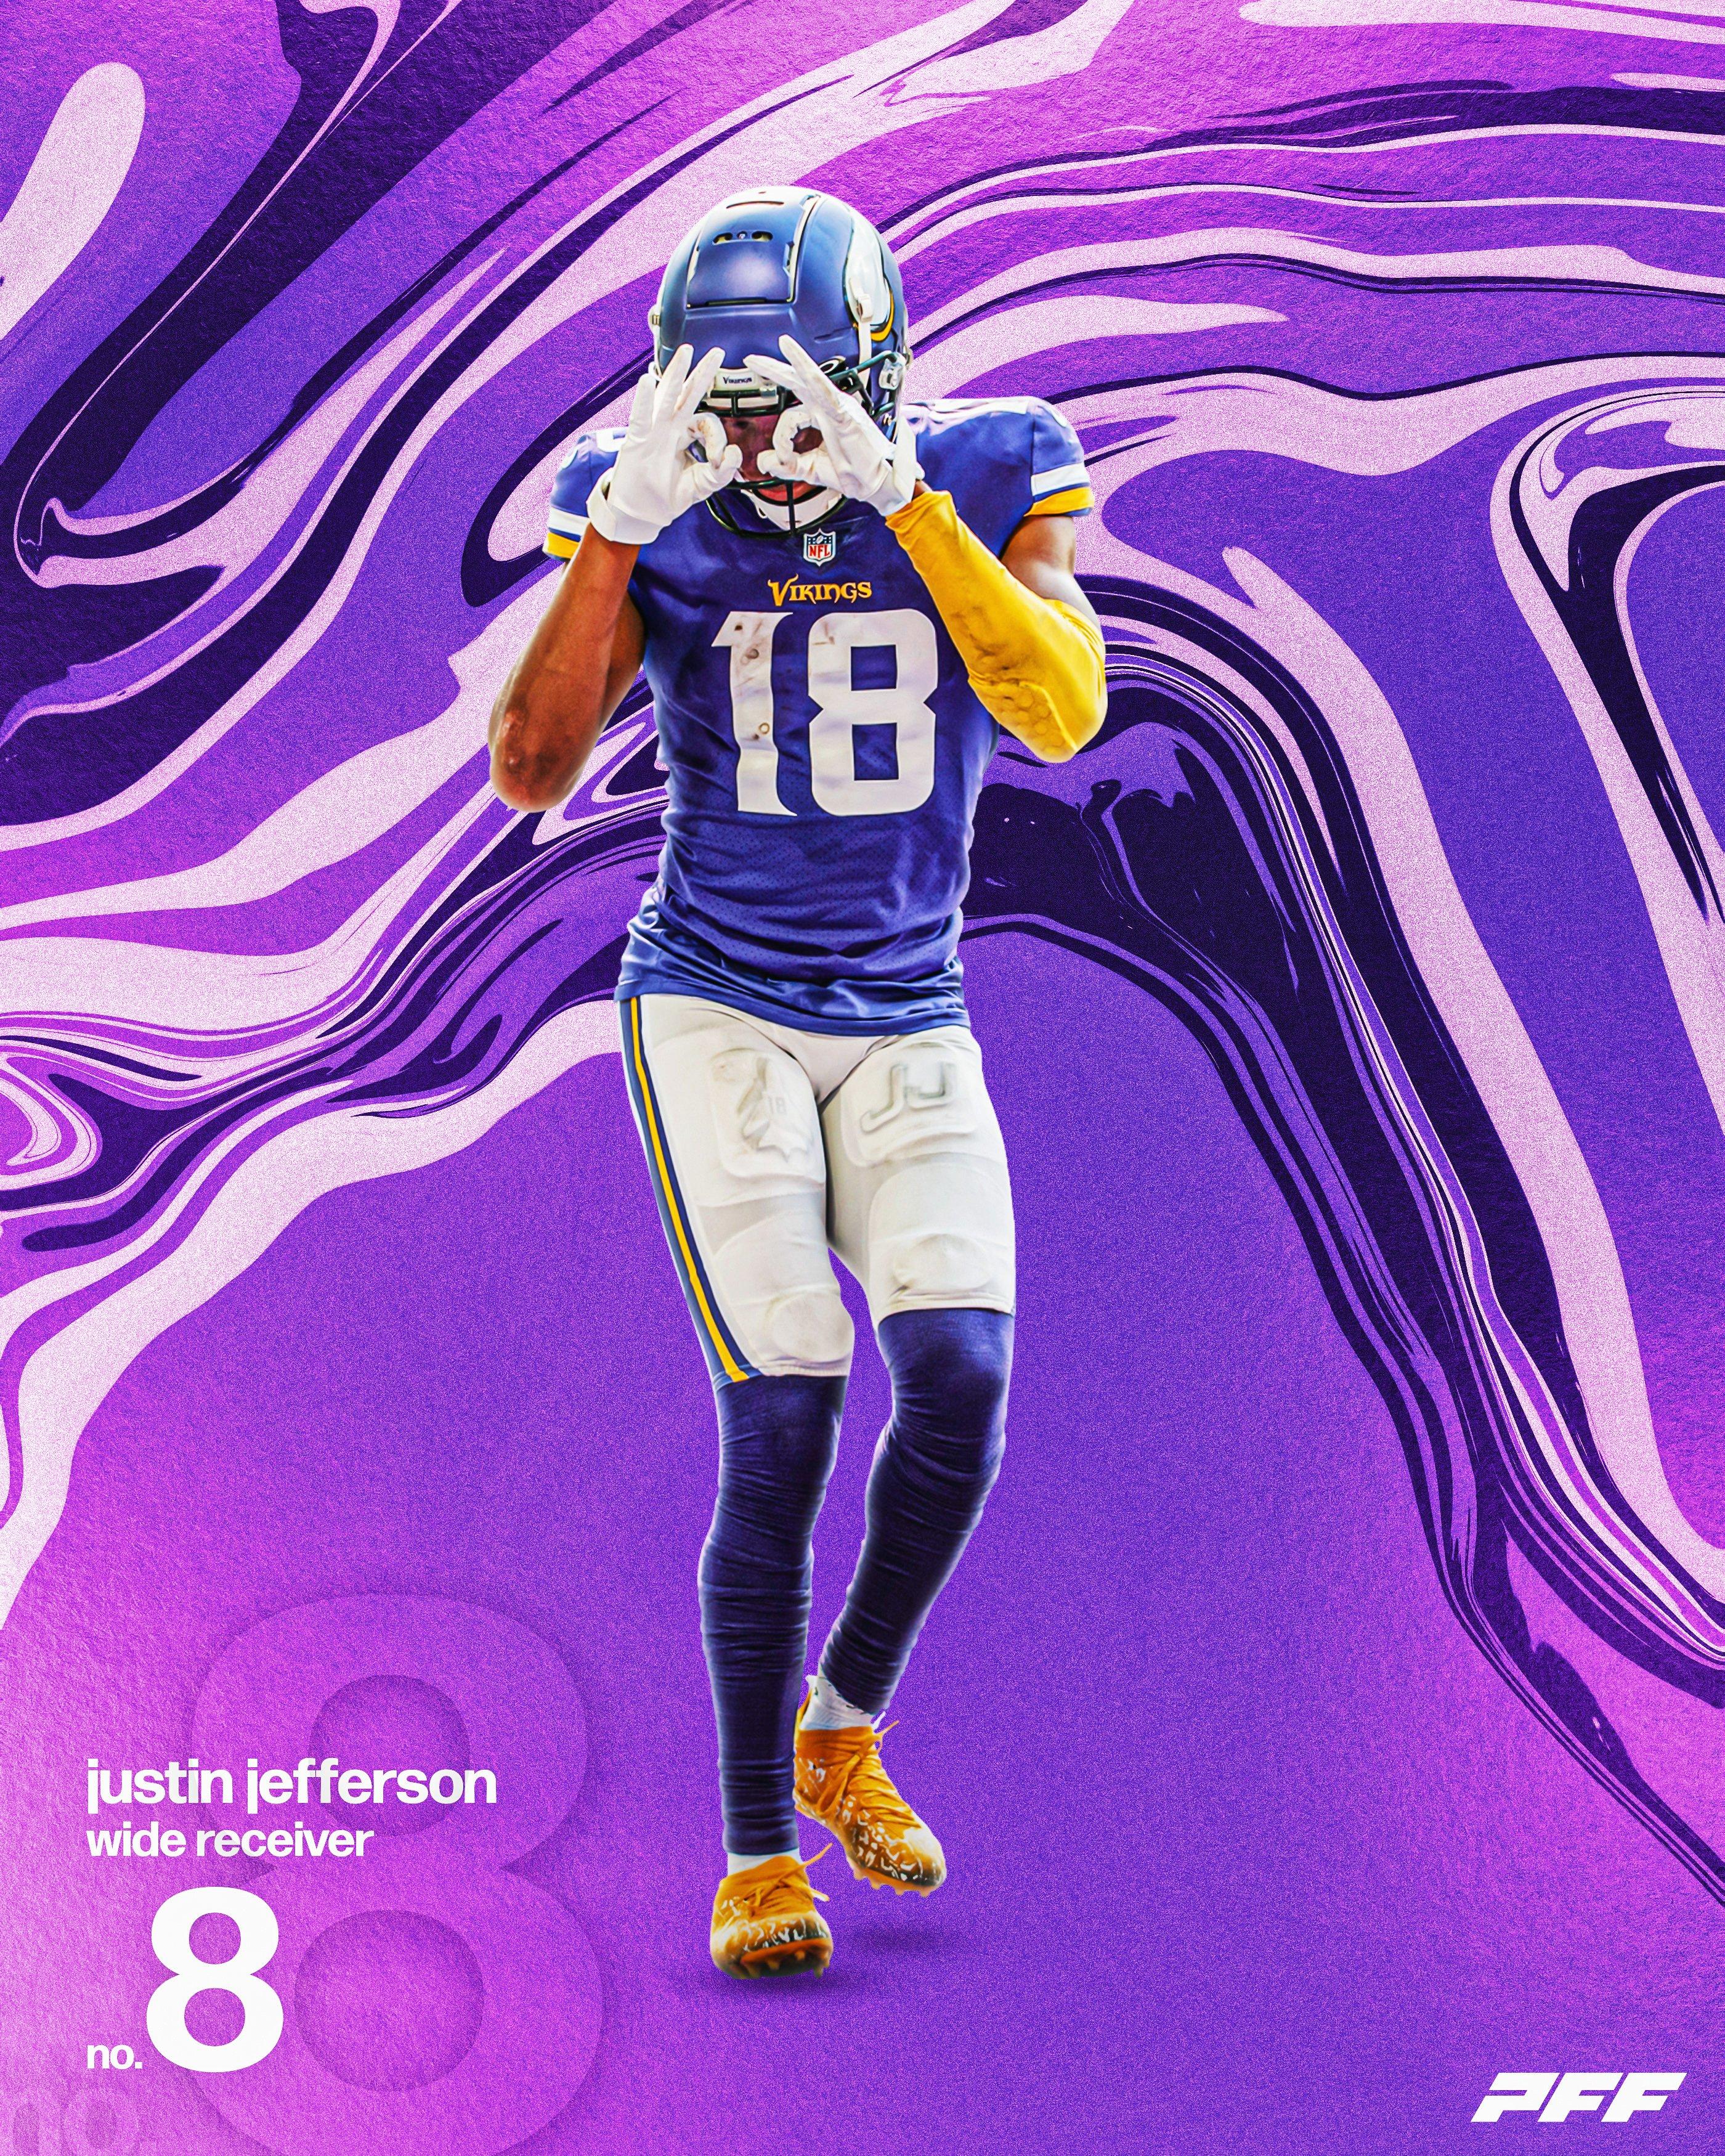 PFF on X Justin Jefferson led all WRs in Receiving yards